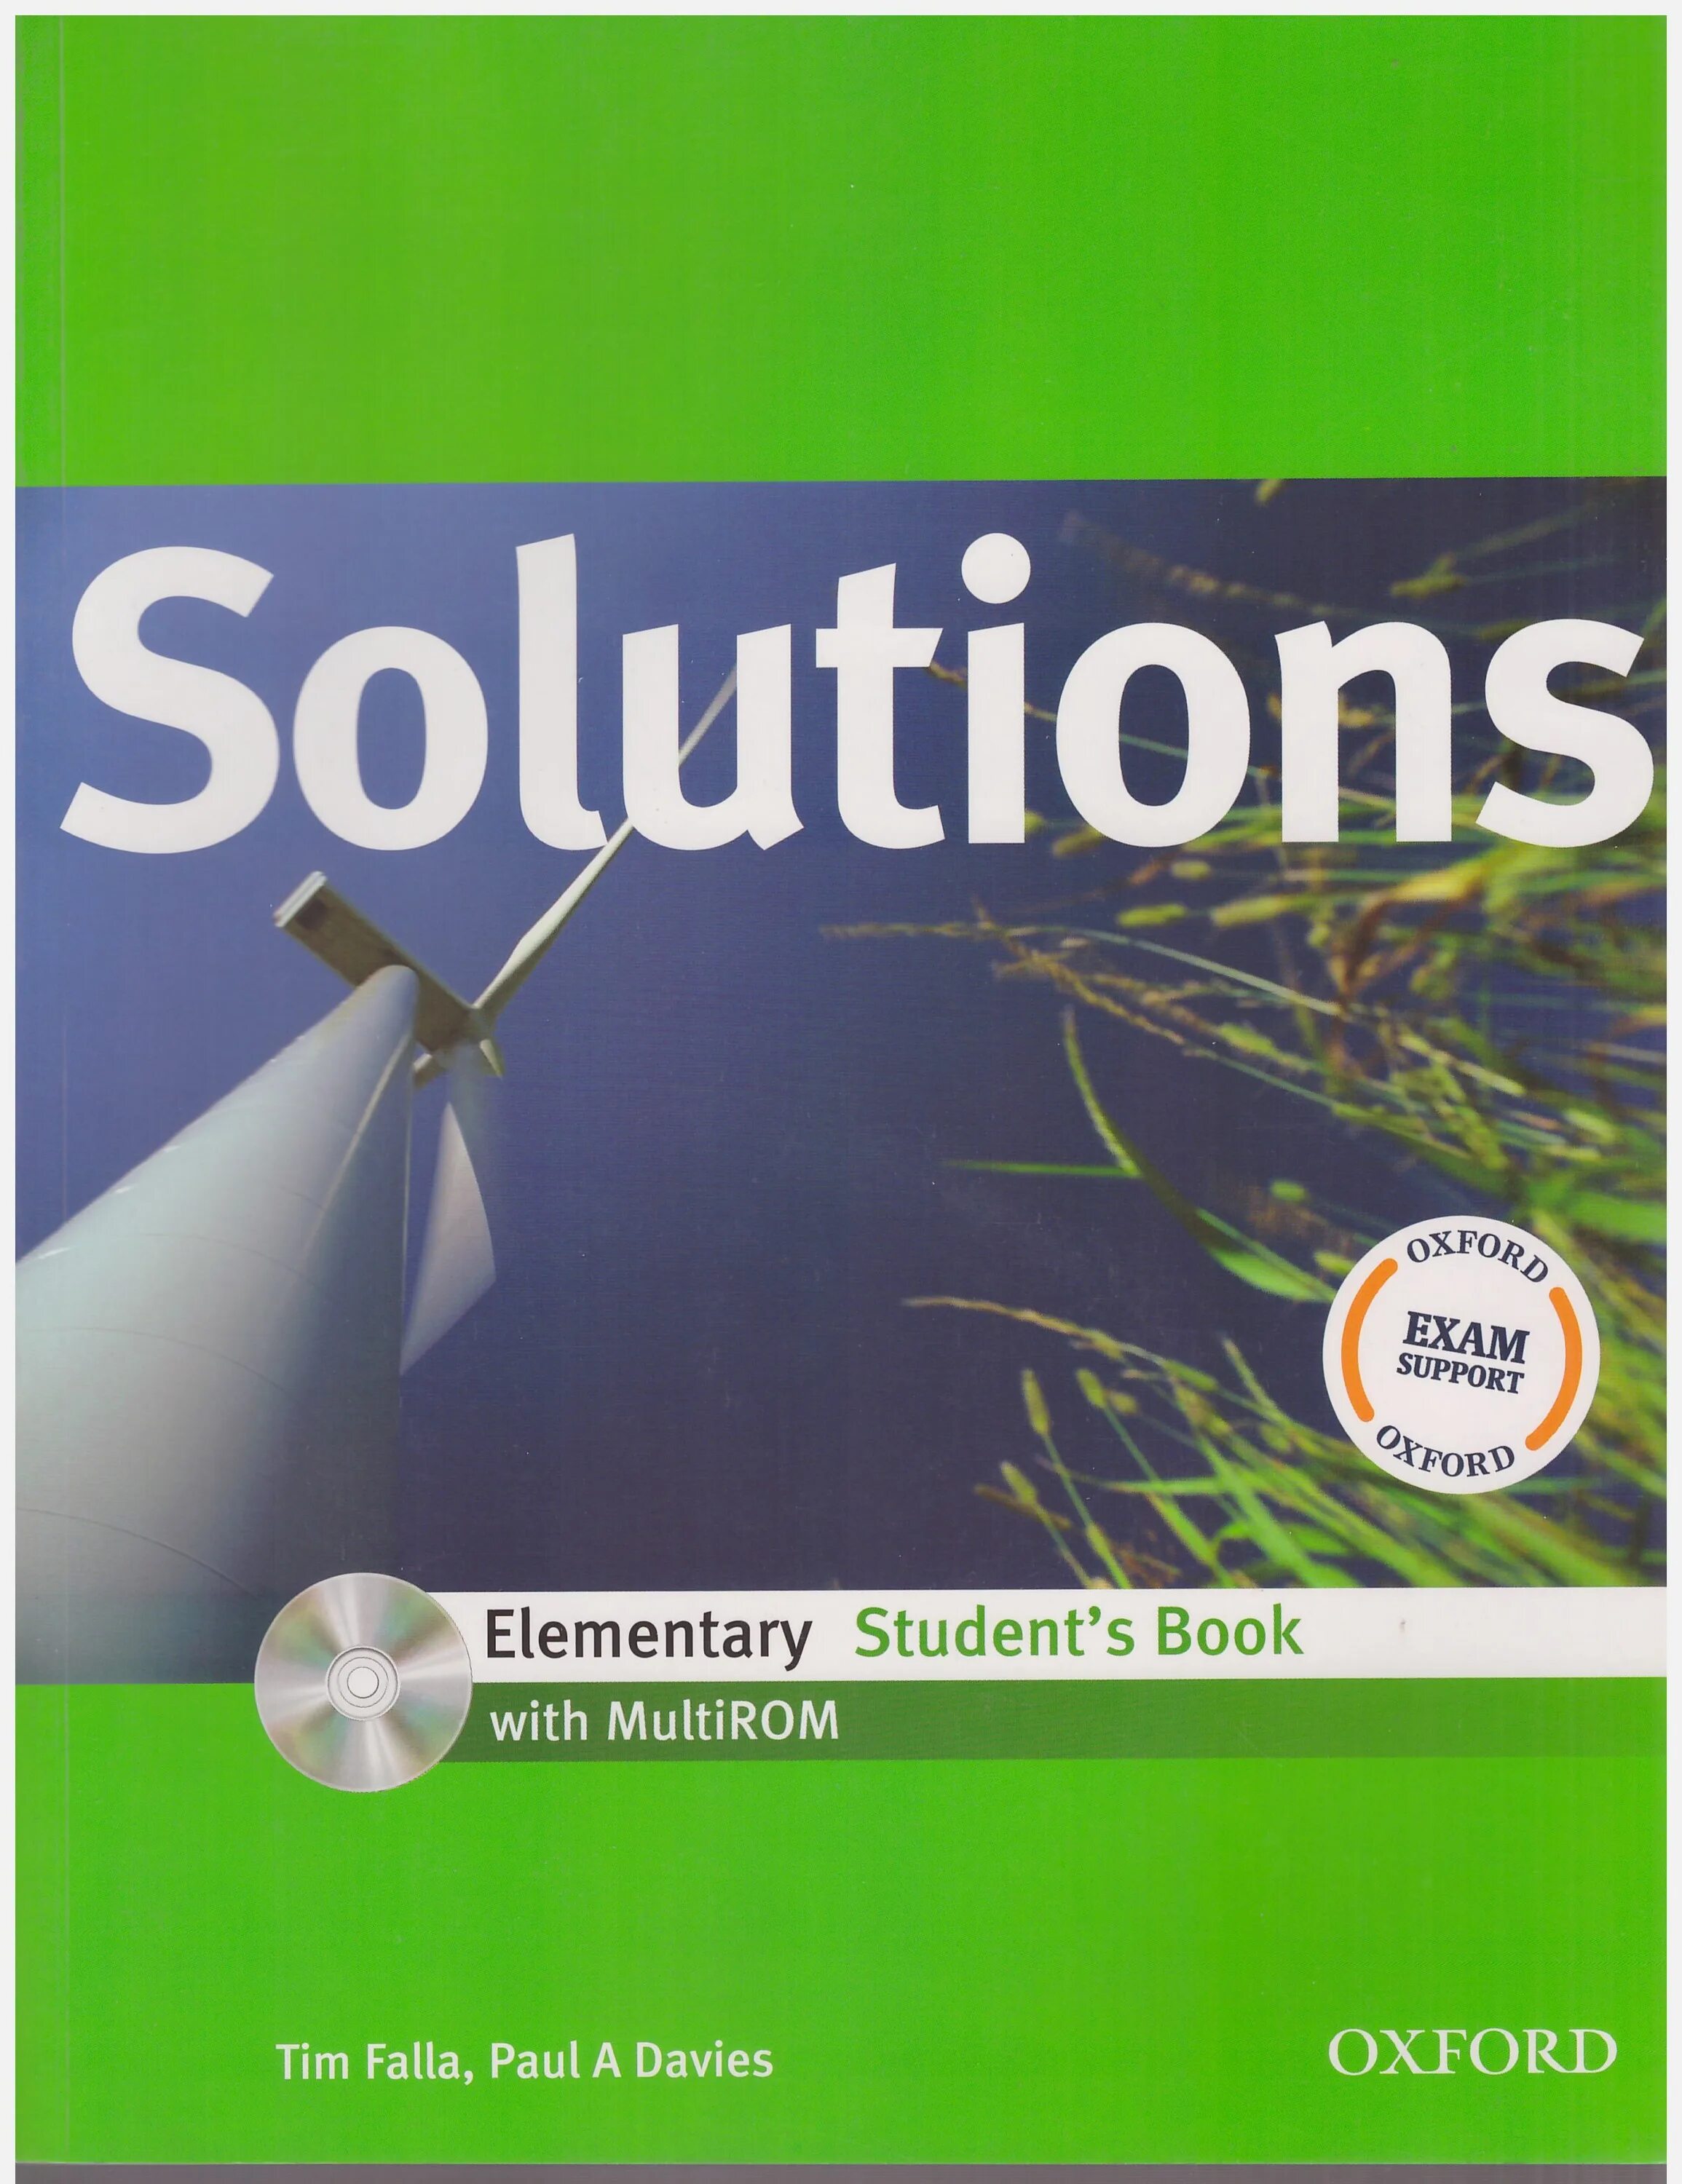 Oxford third Edition solutions Elementary student's book Paul Adavies tim Falla ответы. Solutions Elementary Workbook гдз. Английский язык тим Фалла аудиозаписи. Английский язык учебник solutions elementary